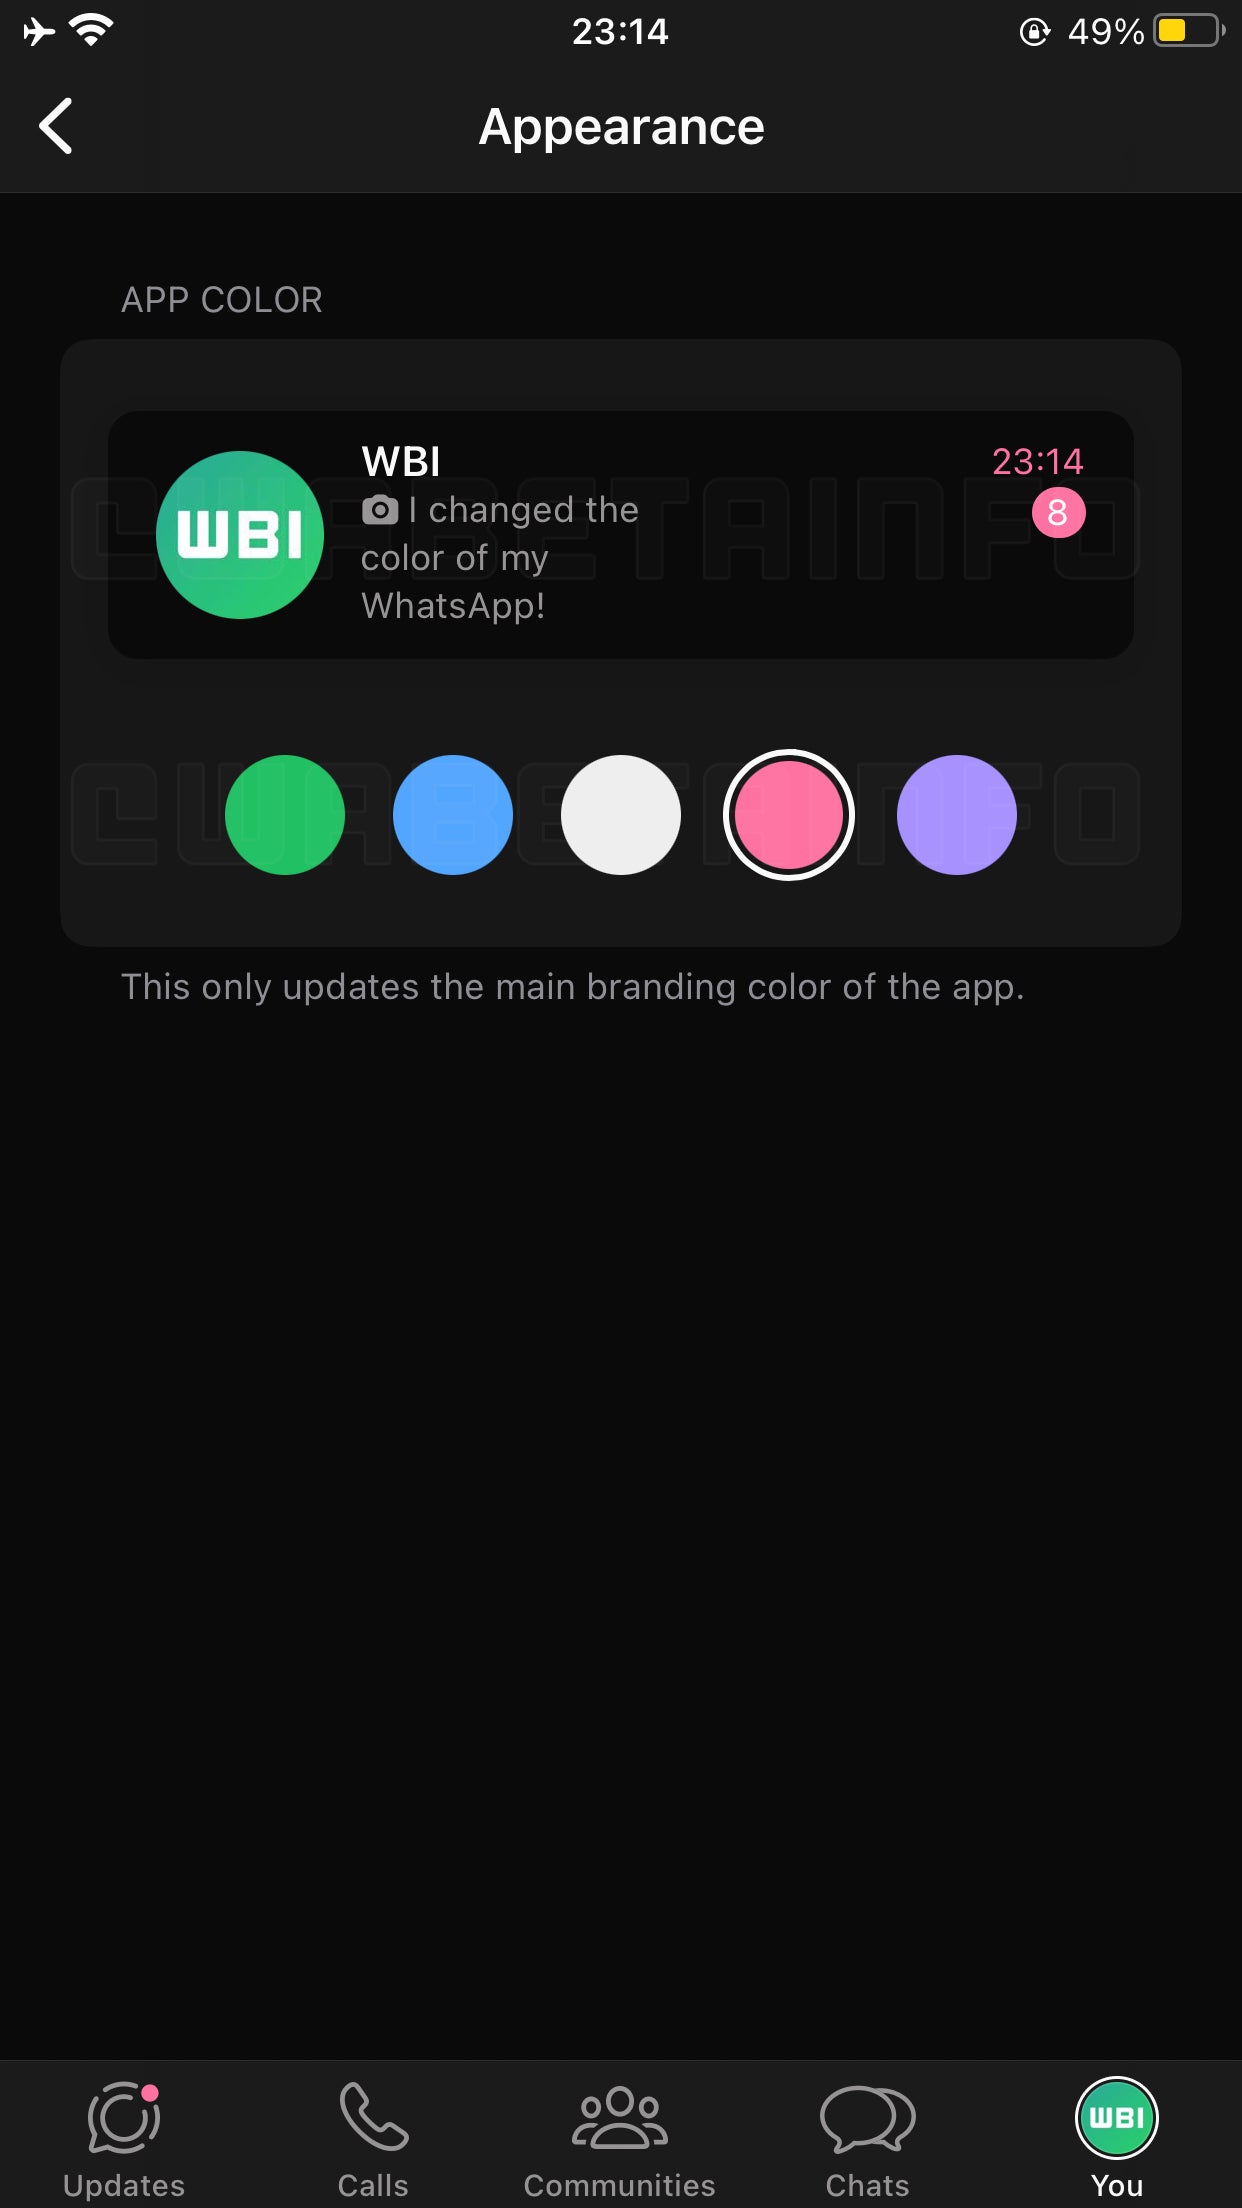 Soon, you’ll be able to paint your WhatsApp any color you like, so long it’s green, blue, white, pink or purple